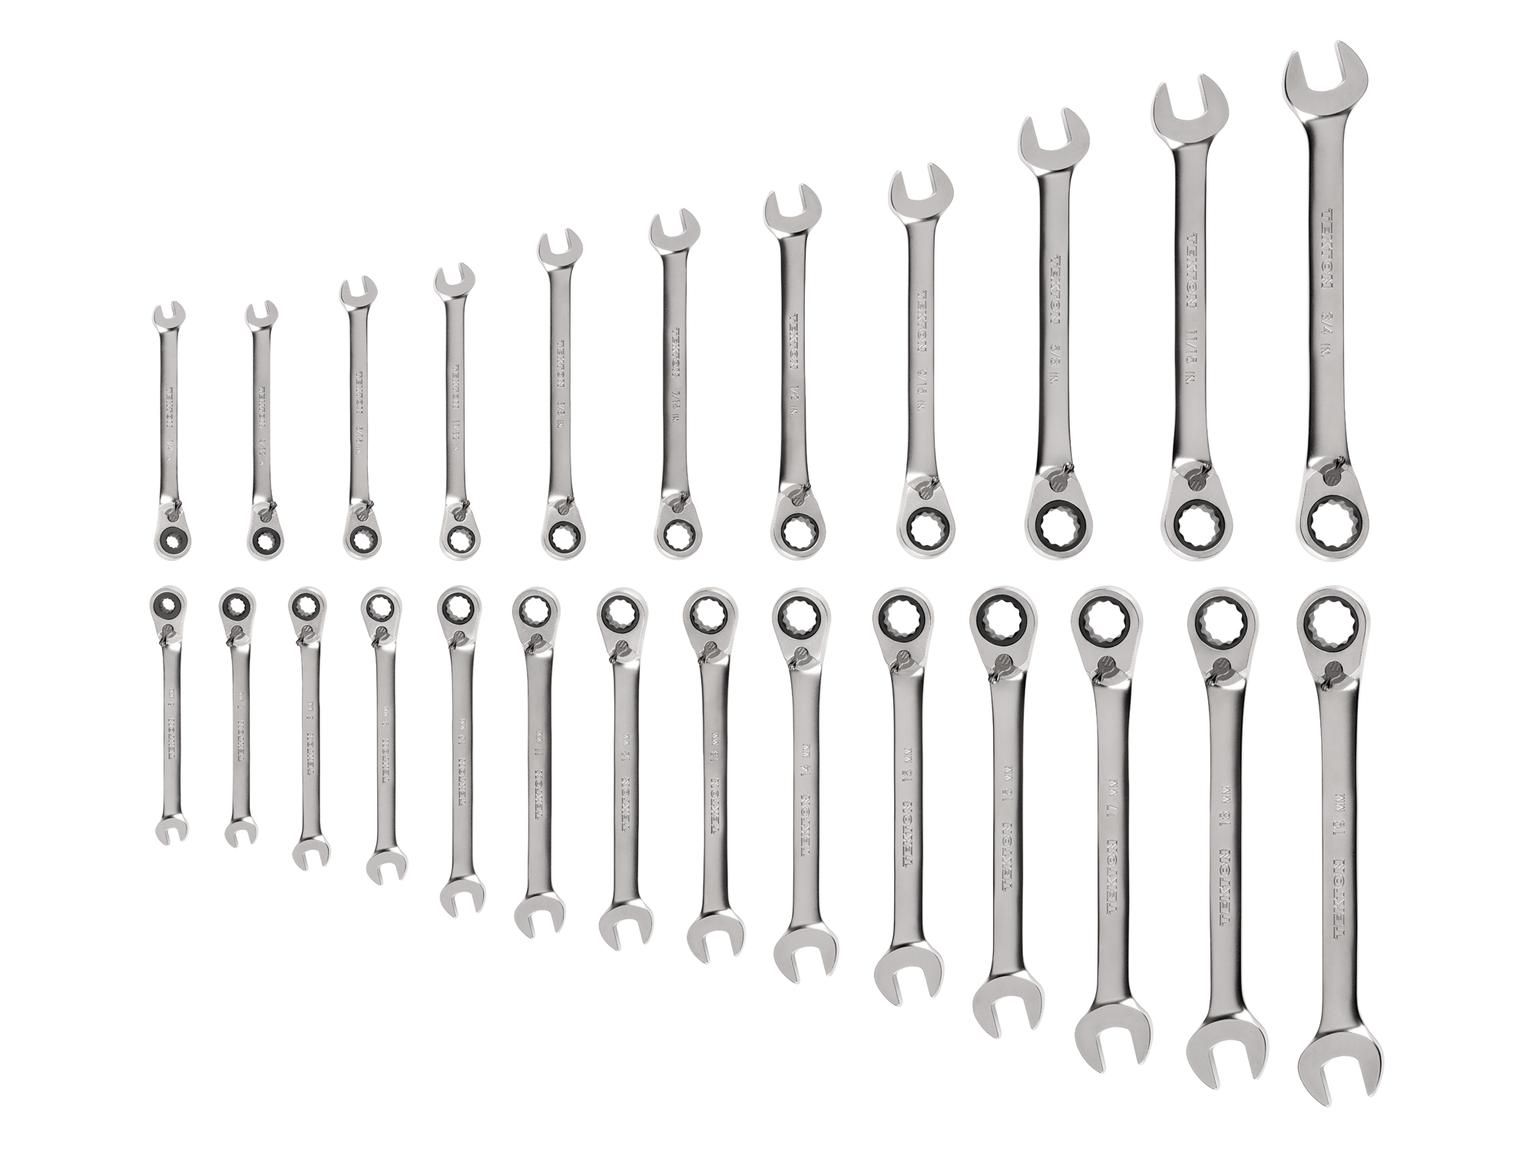 TEKTON WRC94004-T Reversible 12-Point Ratcheting Combination Wrench Set, 25-Piece (1/4-3/4 in., 6-19 mm)